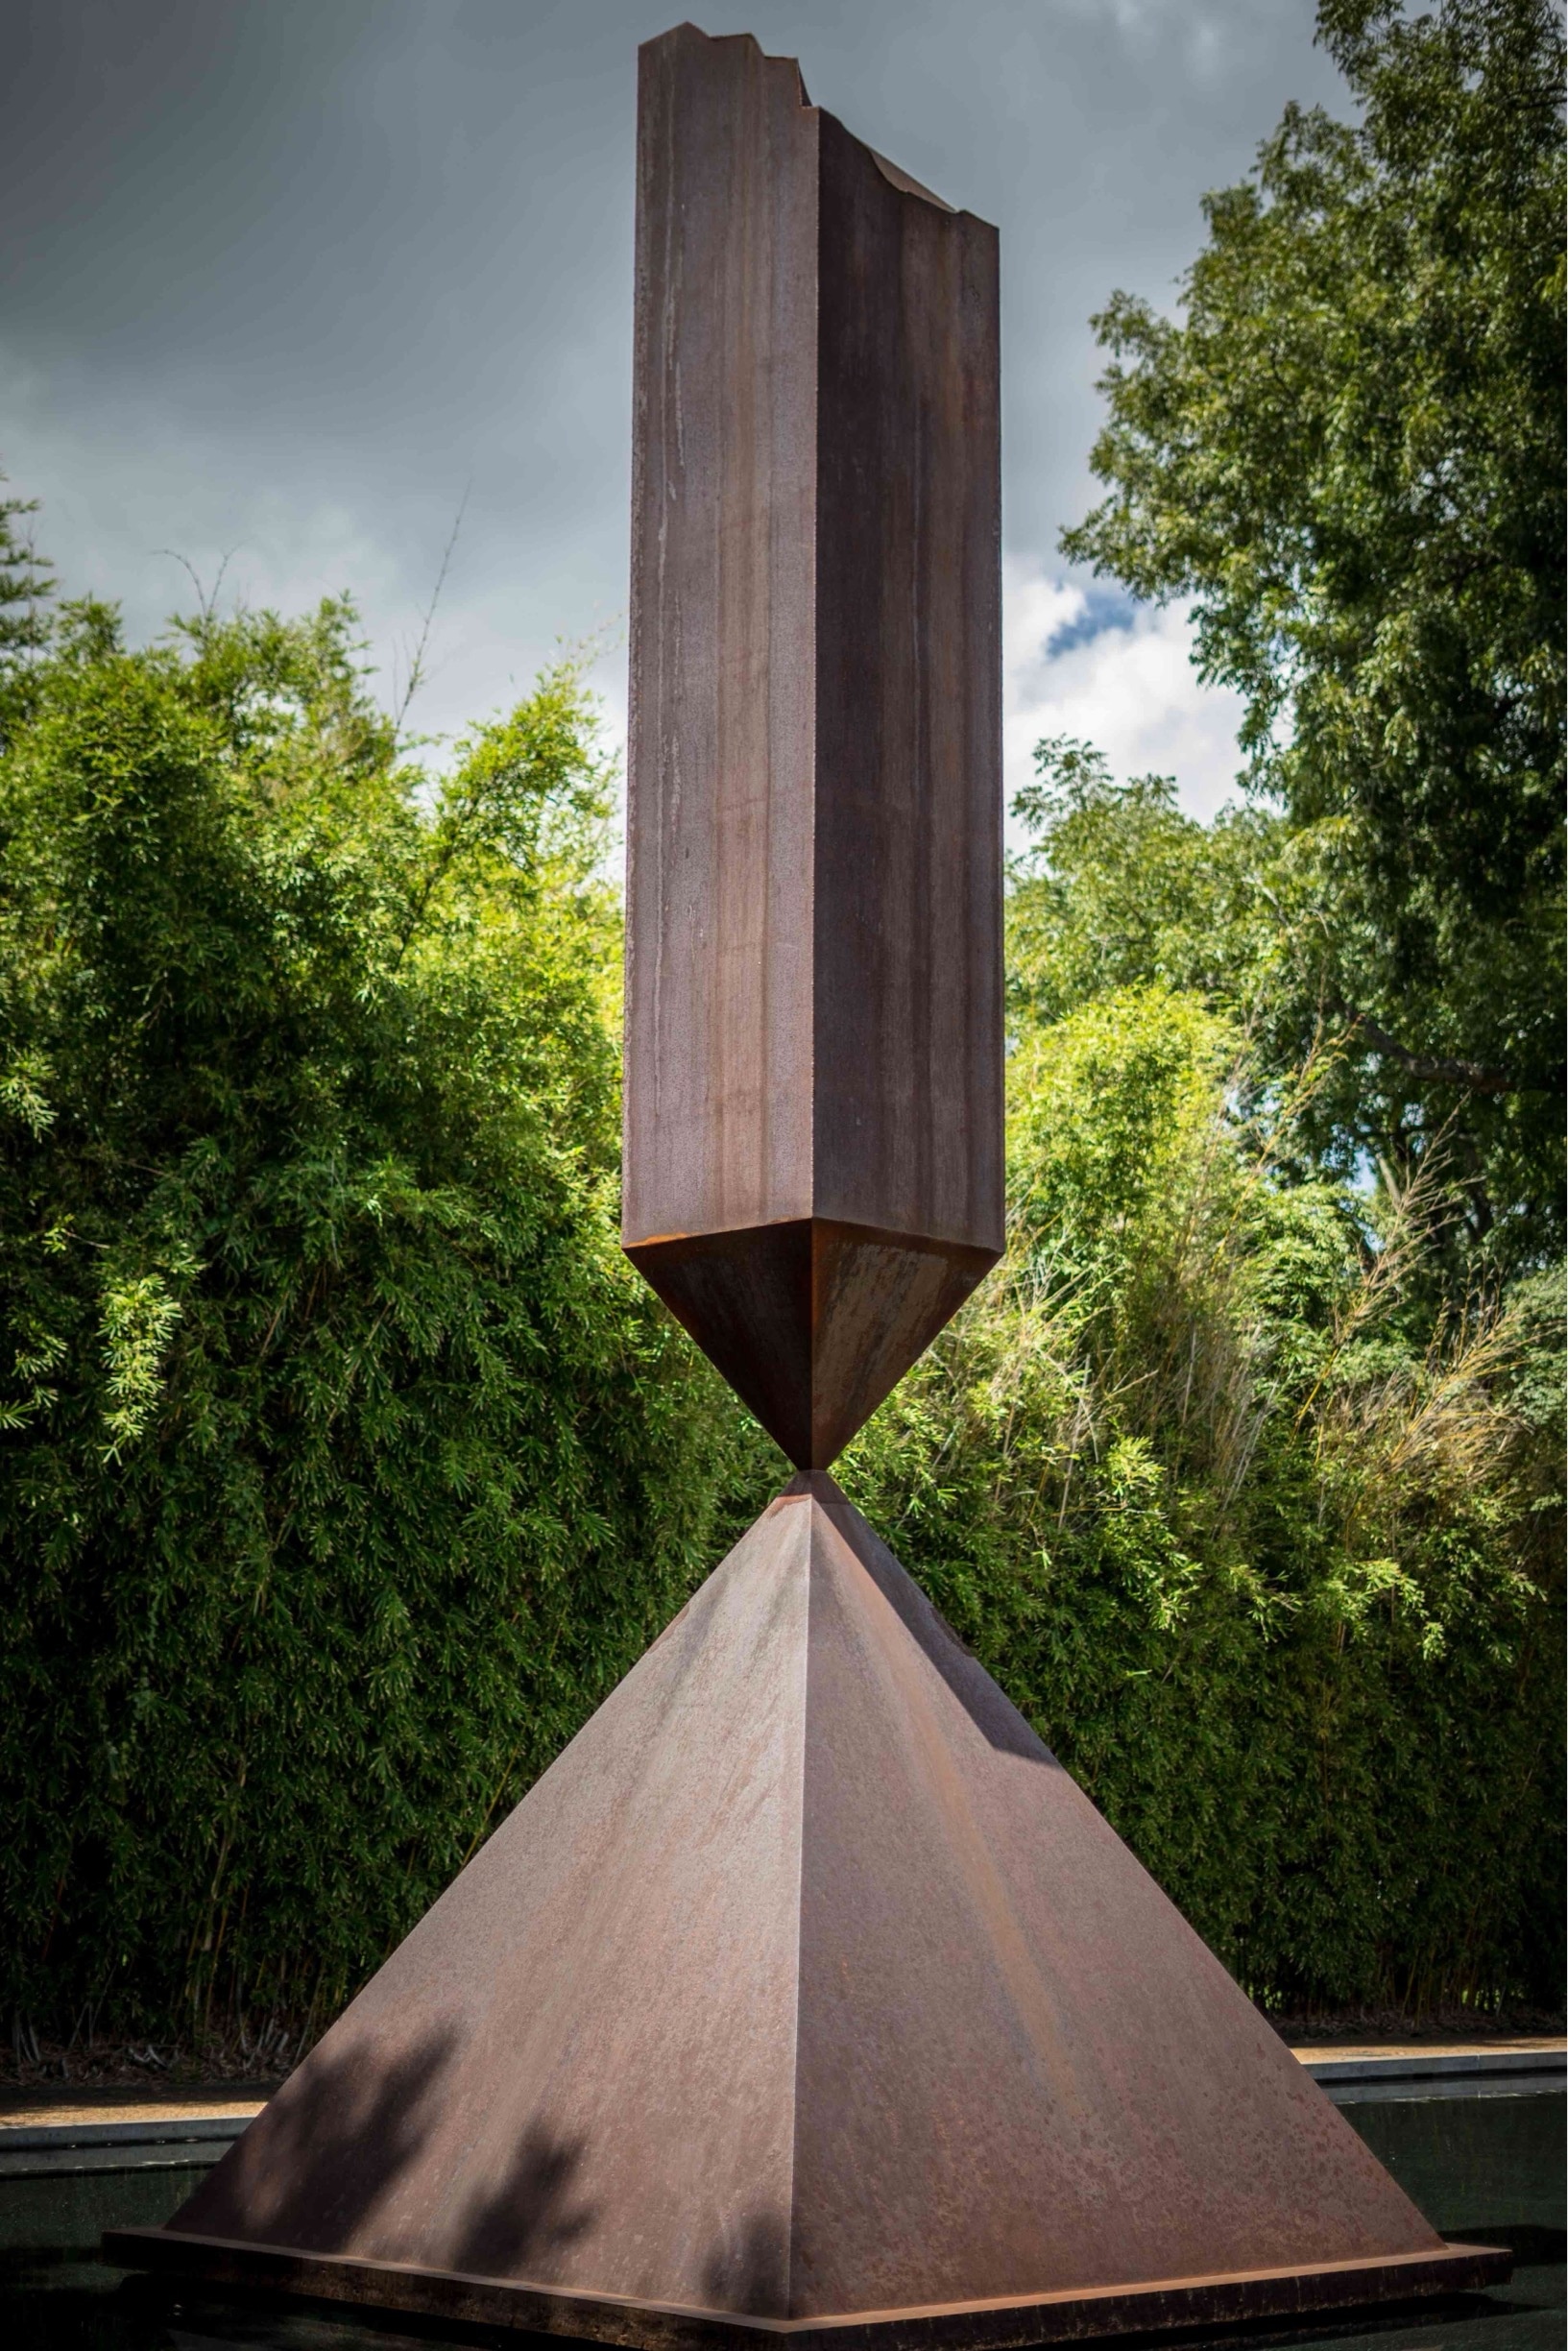 Outside of the Rothko Chapel is this sculpture, Broken Obelisk, and a reflection pool dedicated to Dr. Martin Luther King Jr.